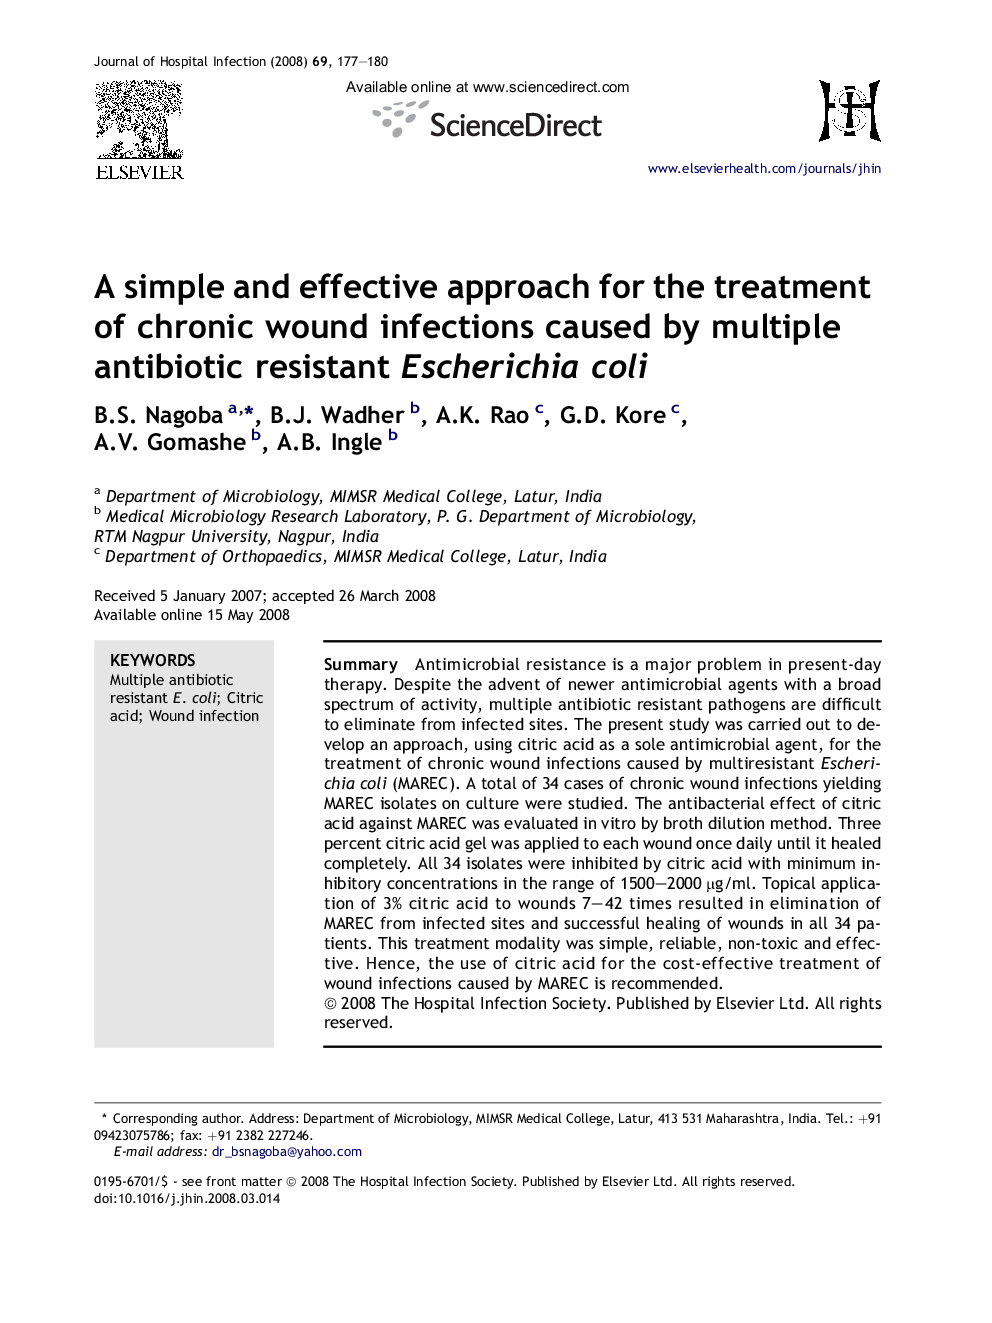 A simple and effective approach for the treatment of chronic wound infections caused by multiple antibiotic resistant Escherichia coli